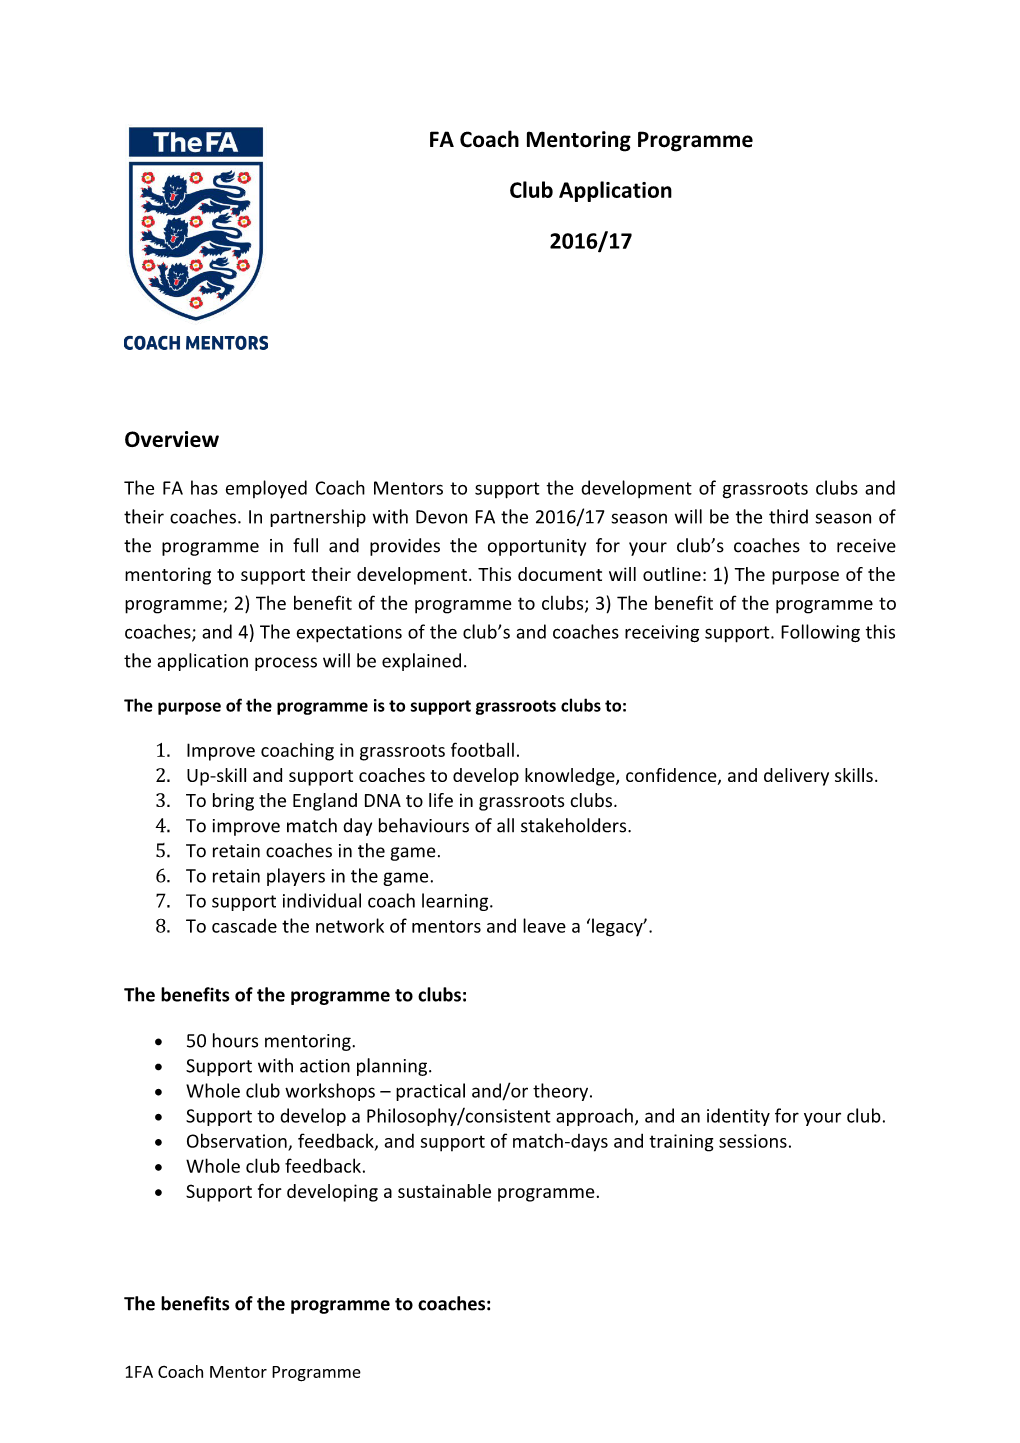 The Purpose of the Programme Is to Support Grassroots Clubs To